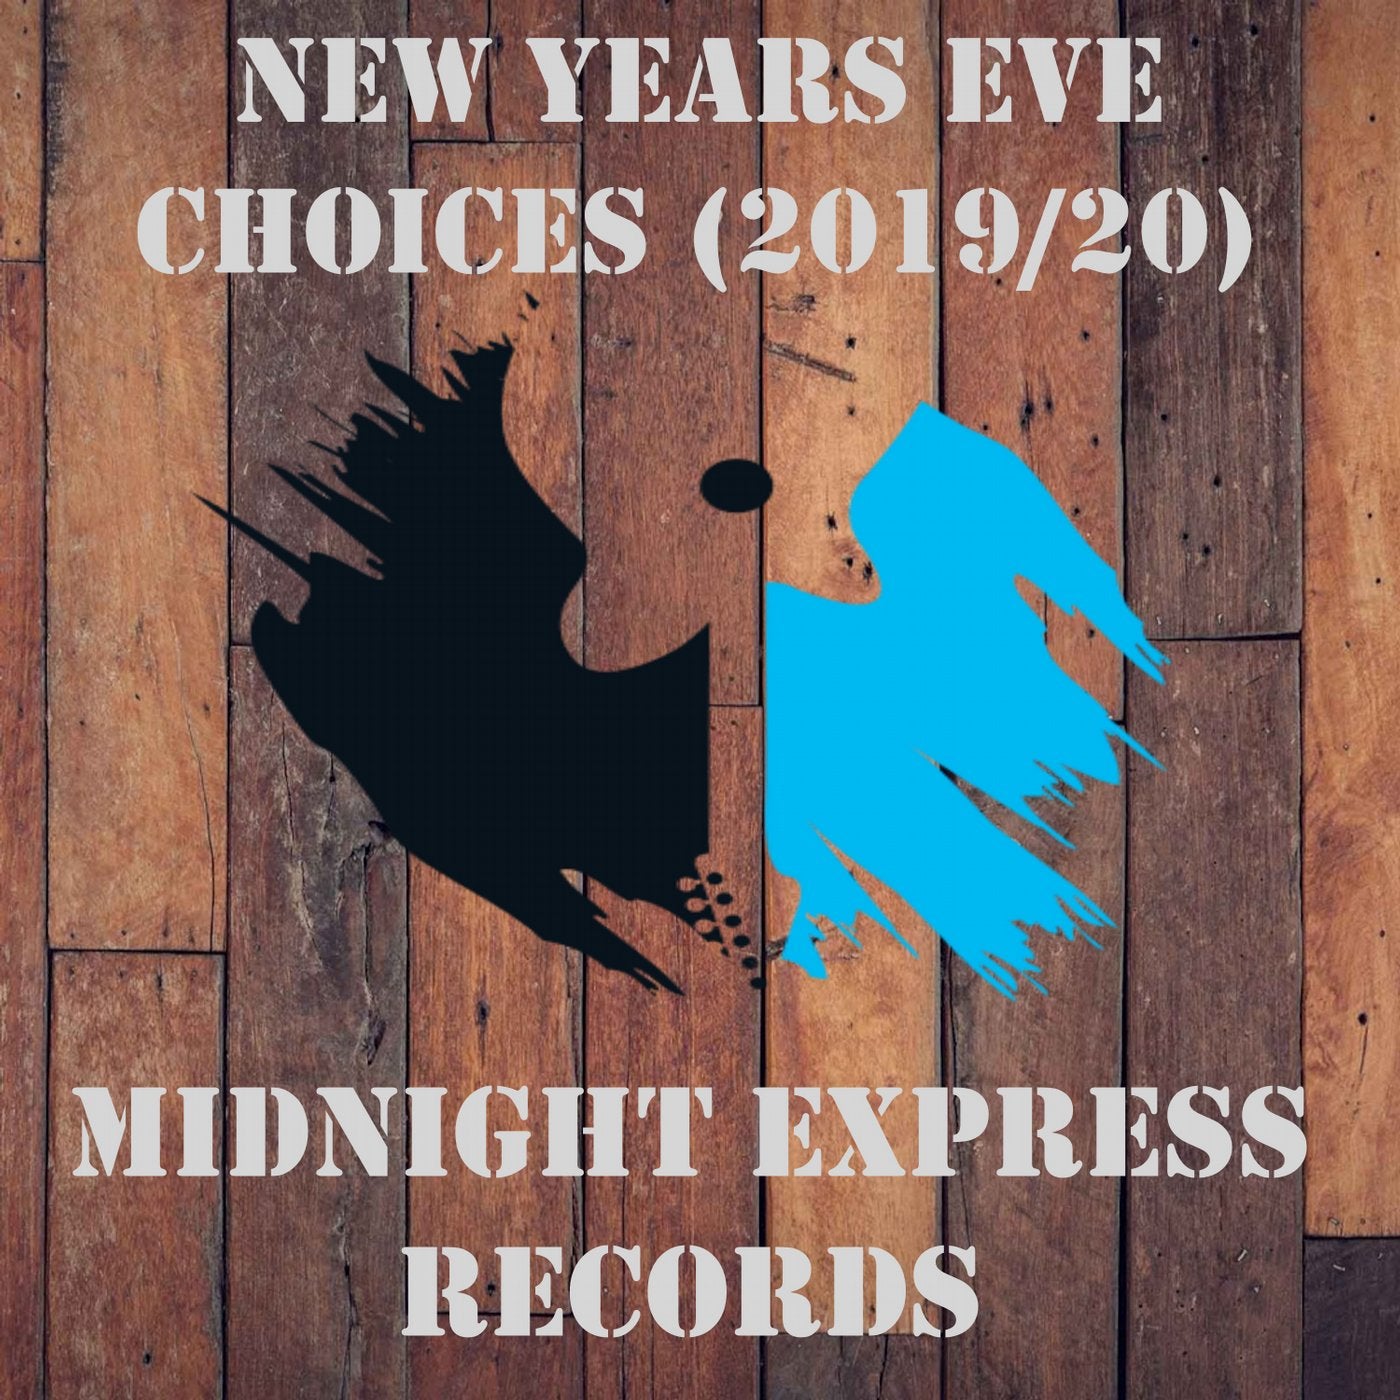 New years eve choices 2019